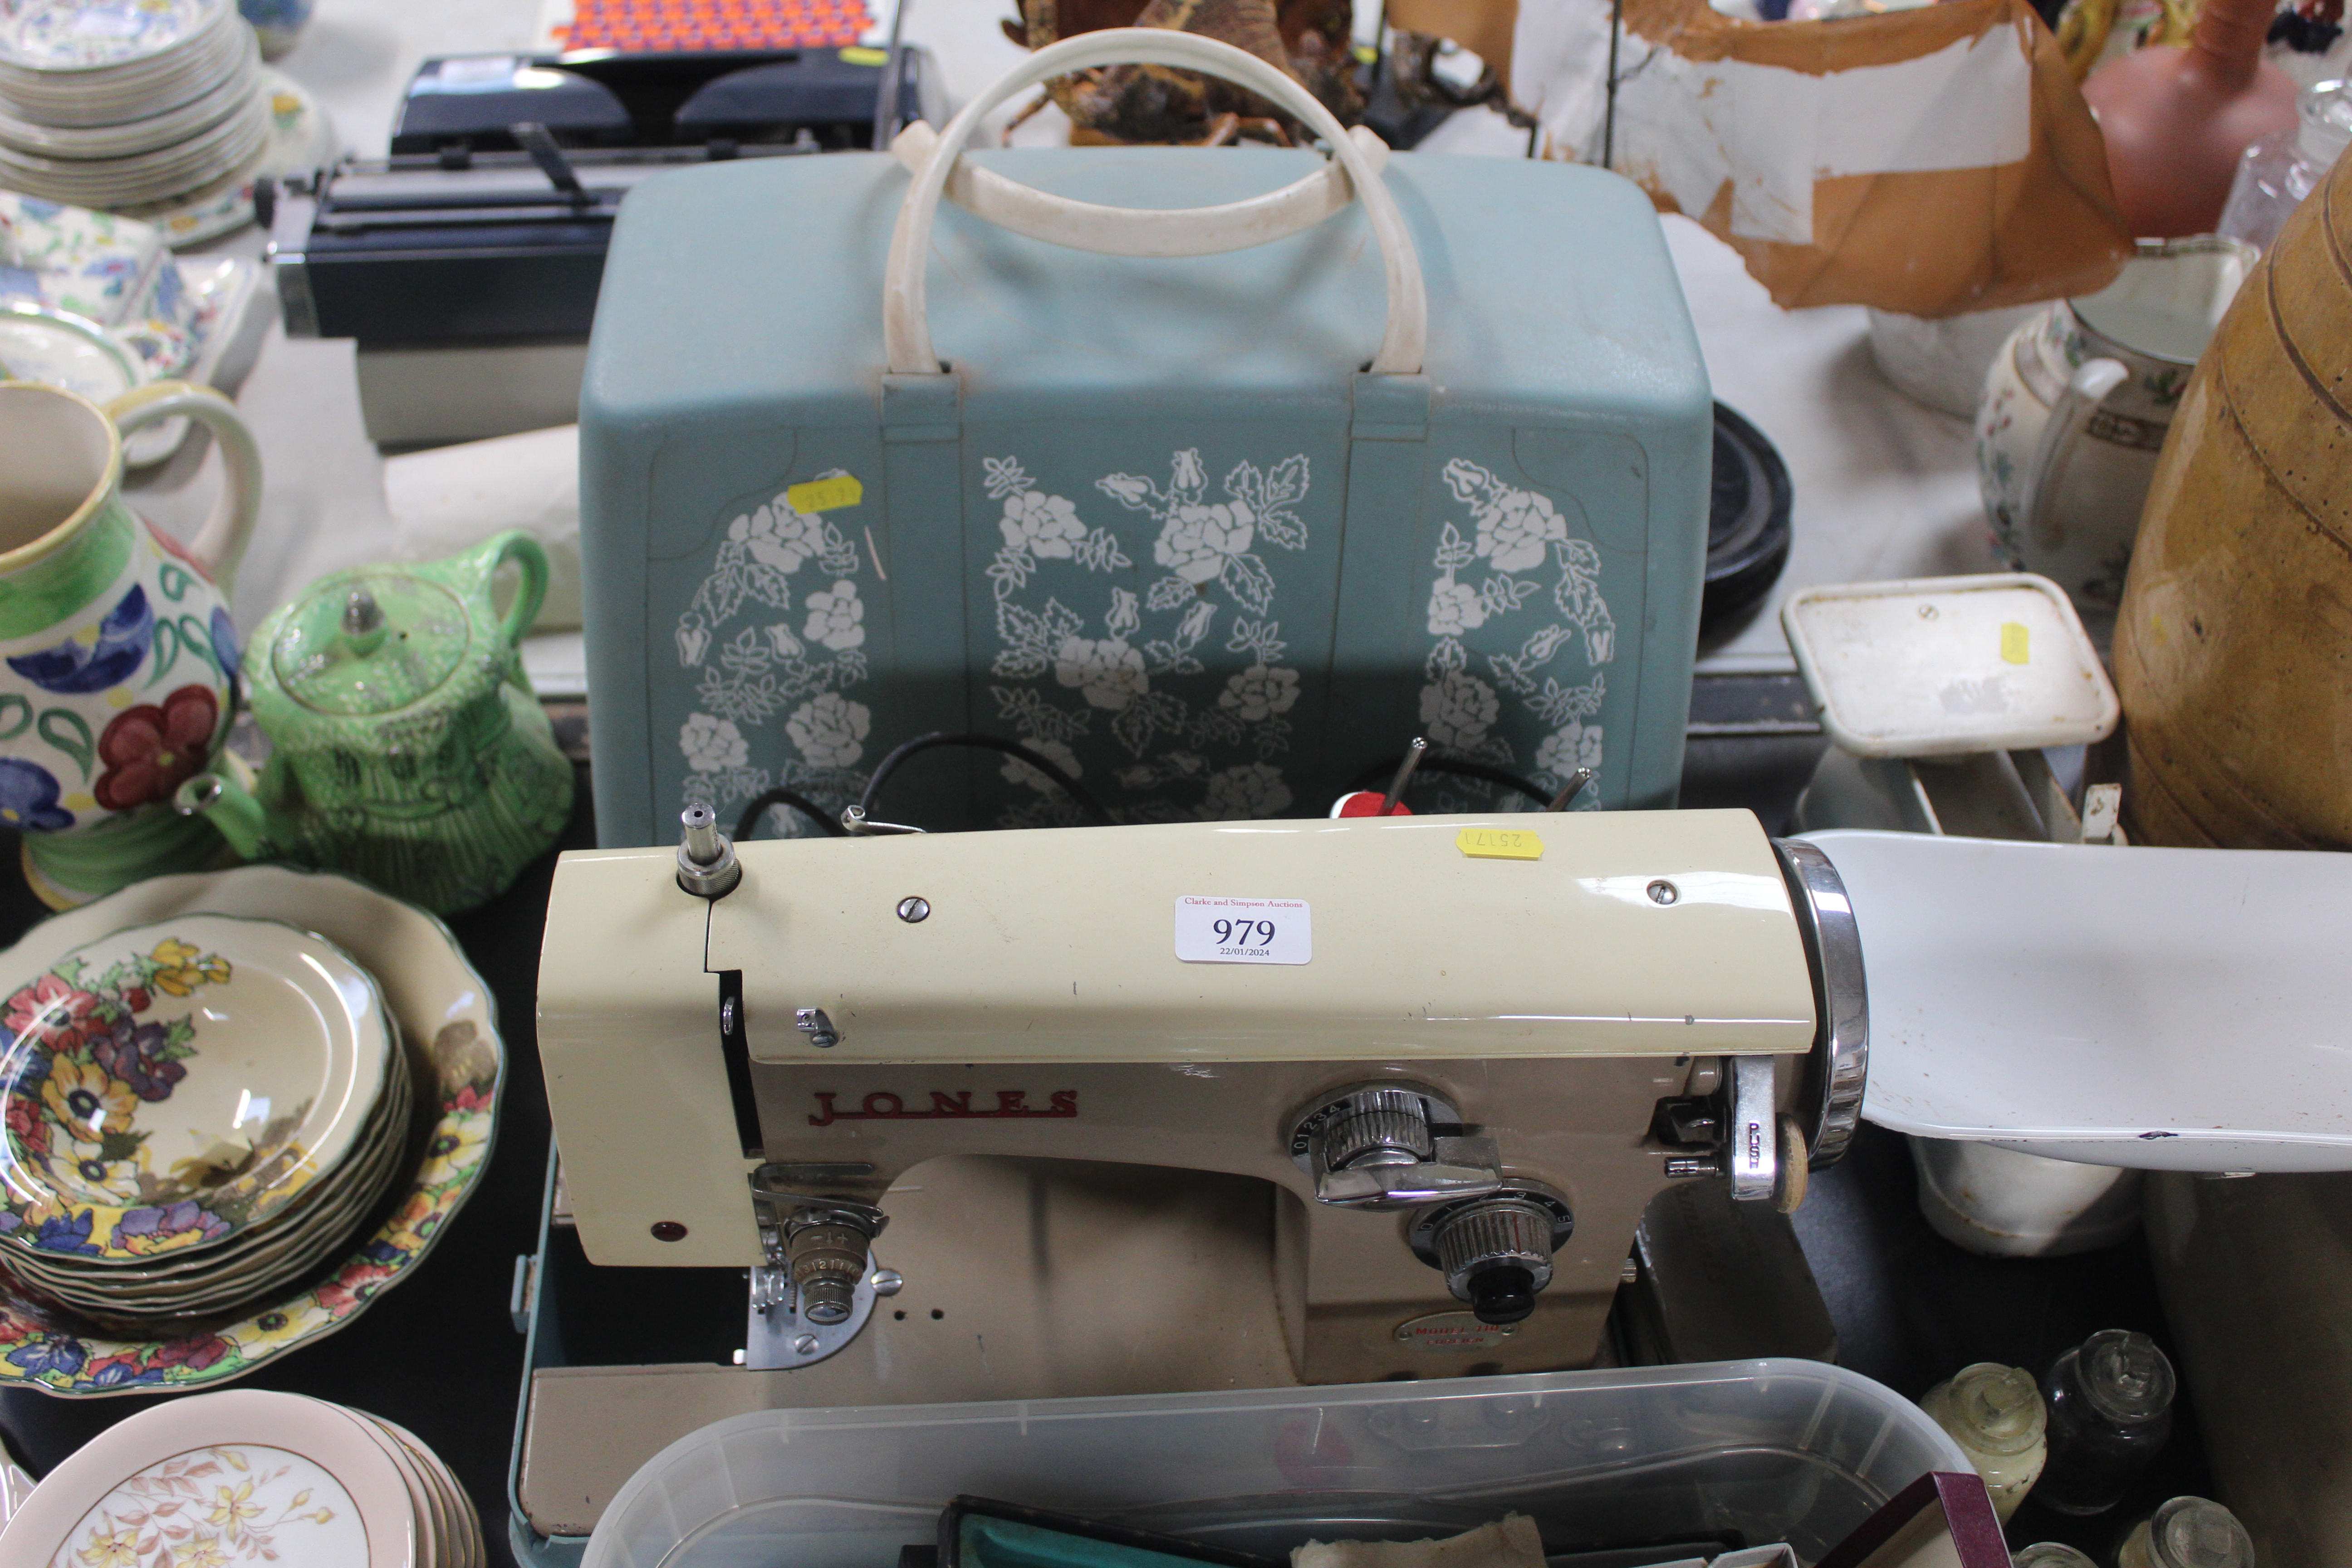 A Jones 110 electric sewing machine with case, sol